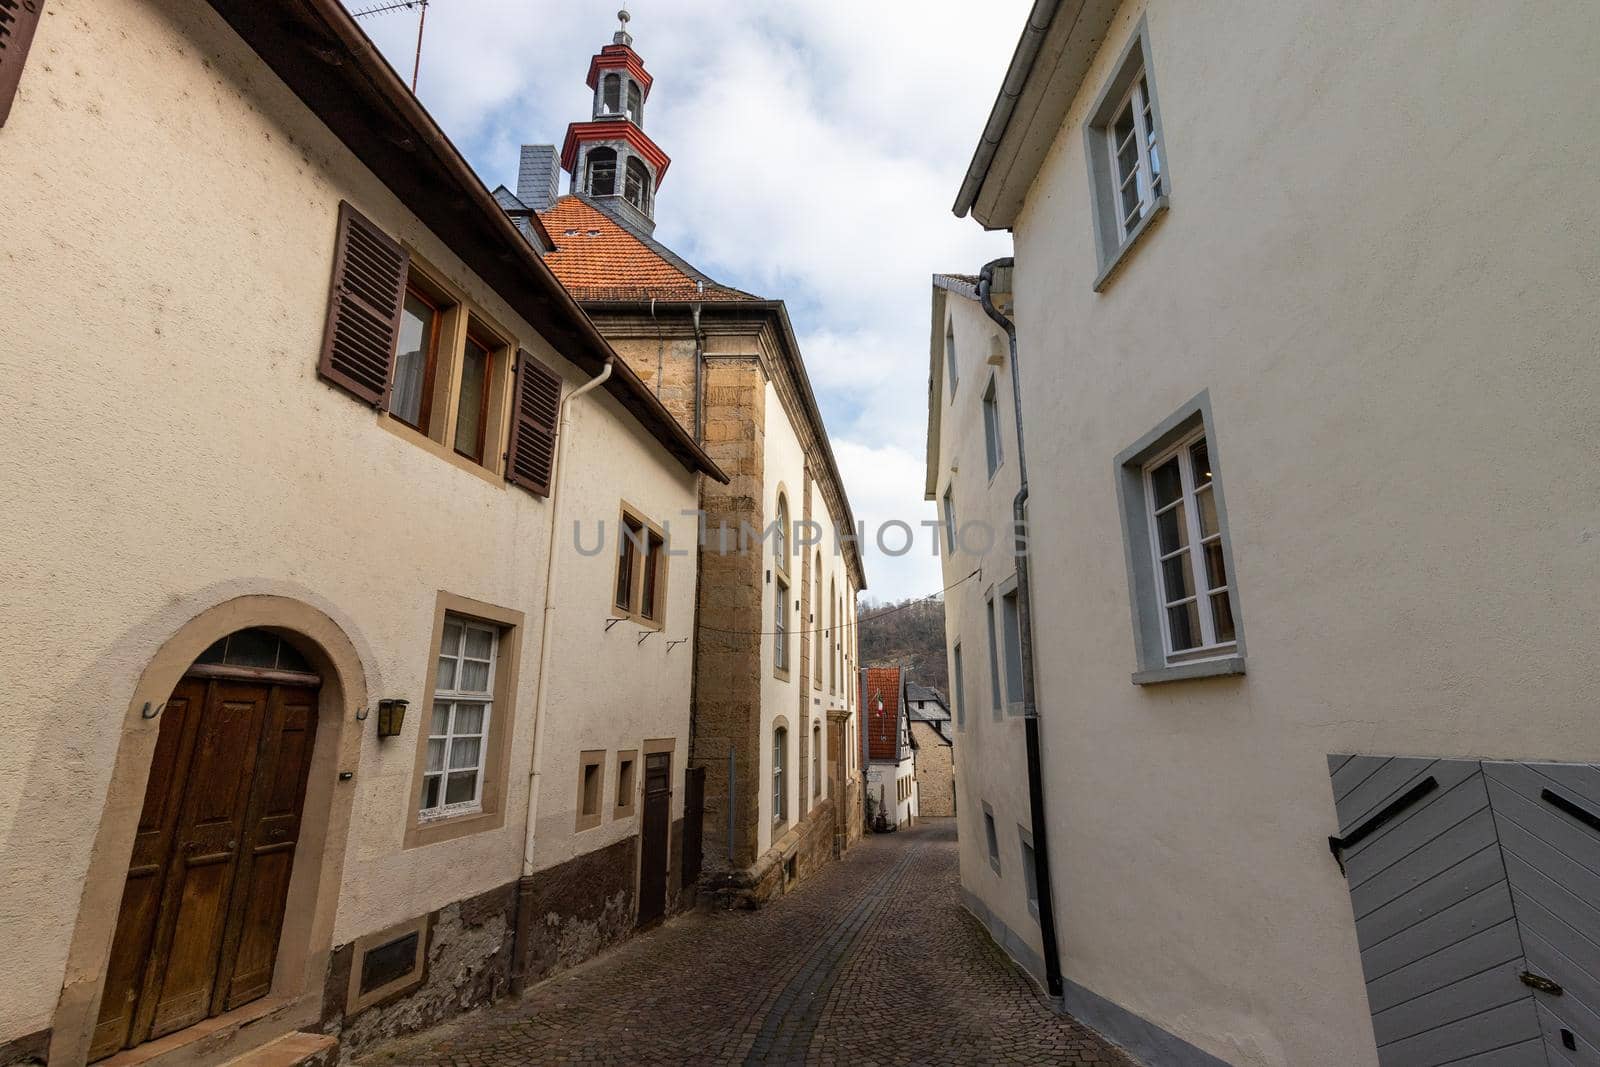 Cobbled road with historic houses in Meisenheim by reinerc